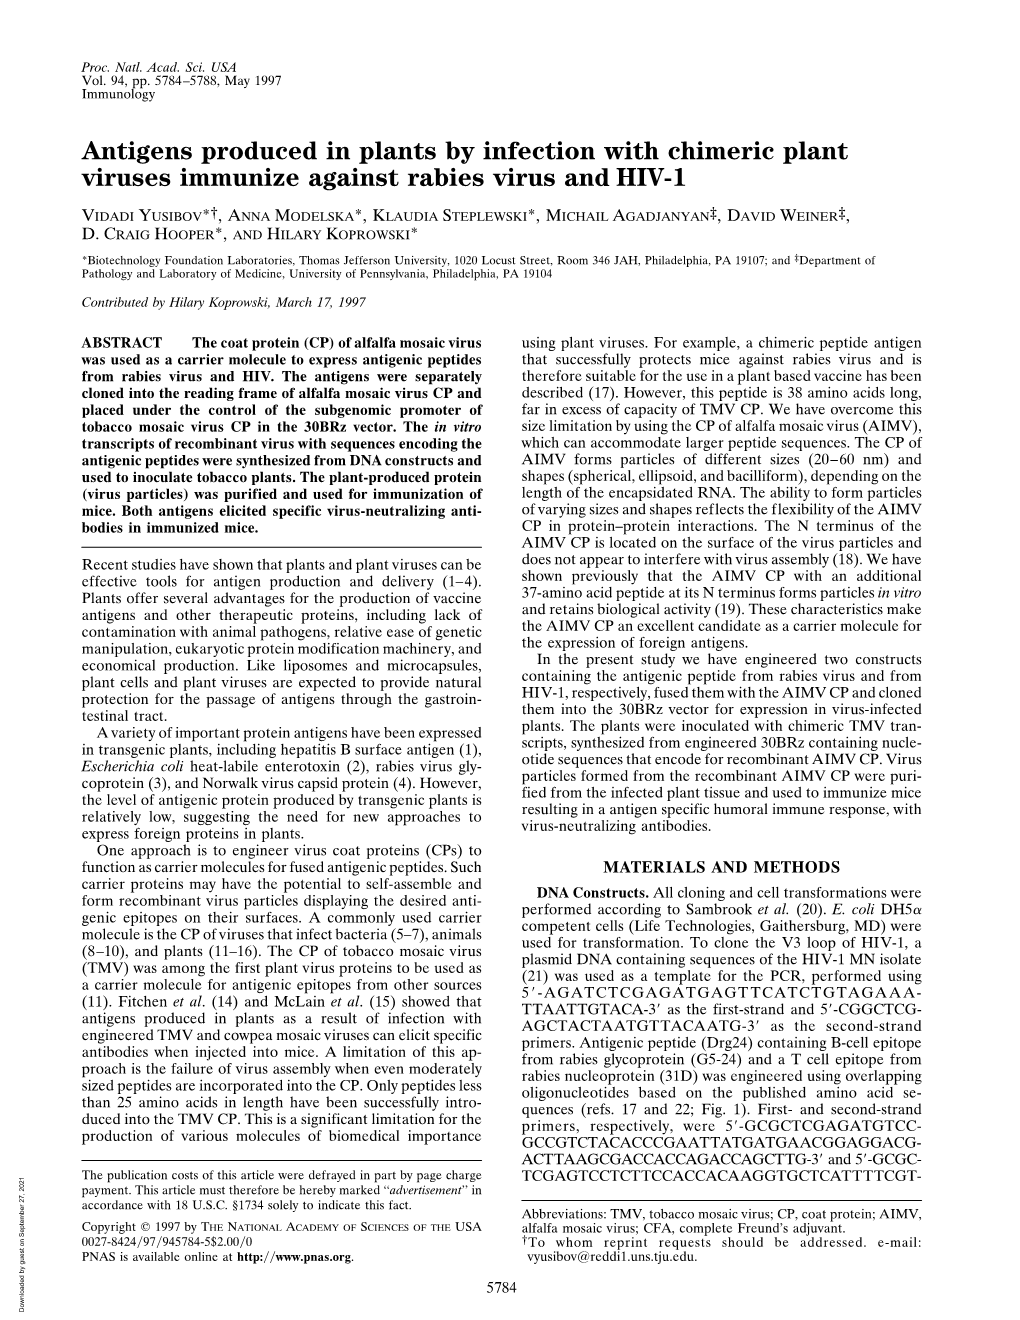 Antigens Produced in Plants by Infection with Chimeric Plant Viruses Immunize Against Rabies Virus and HIV-1